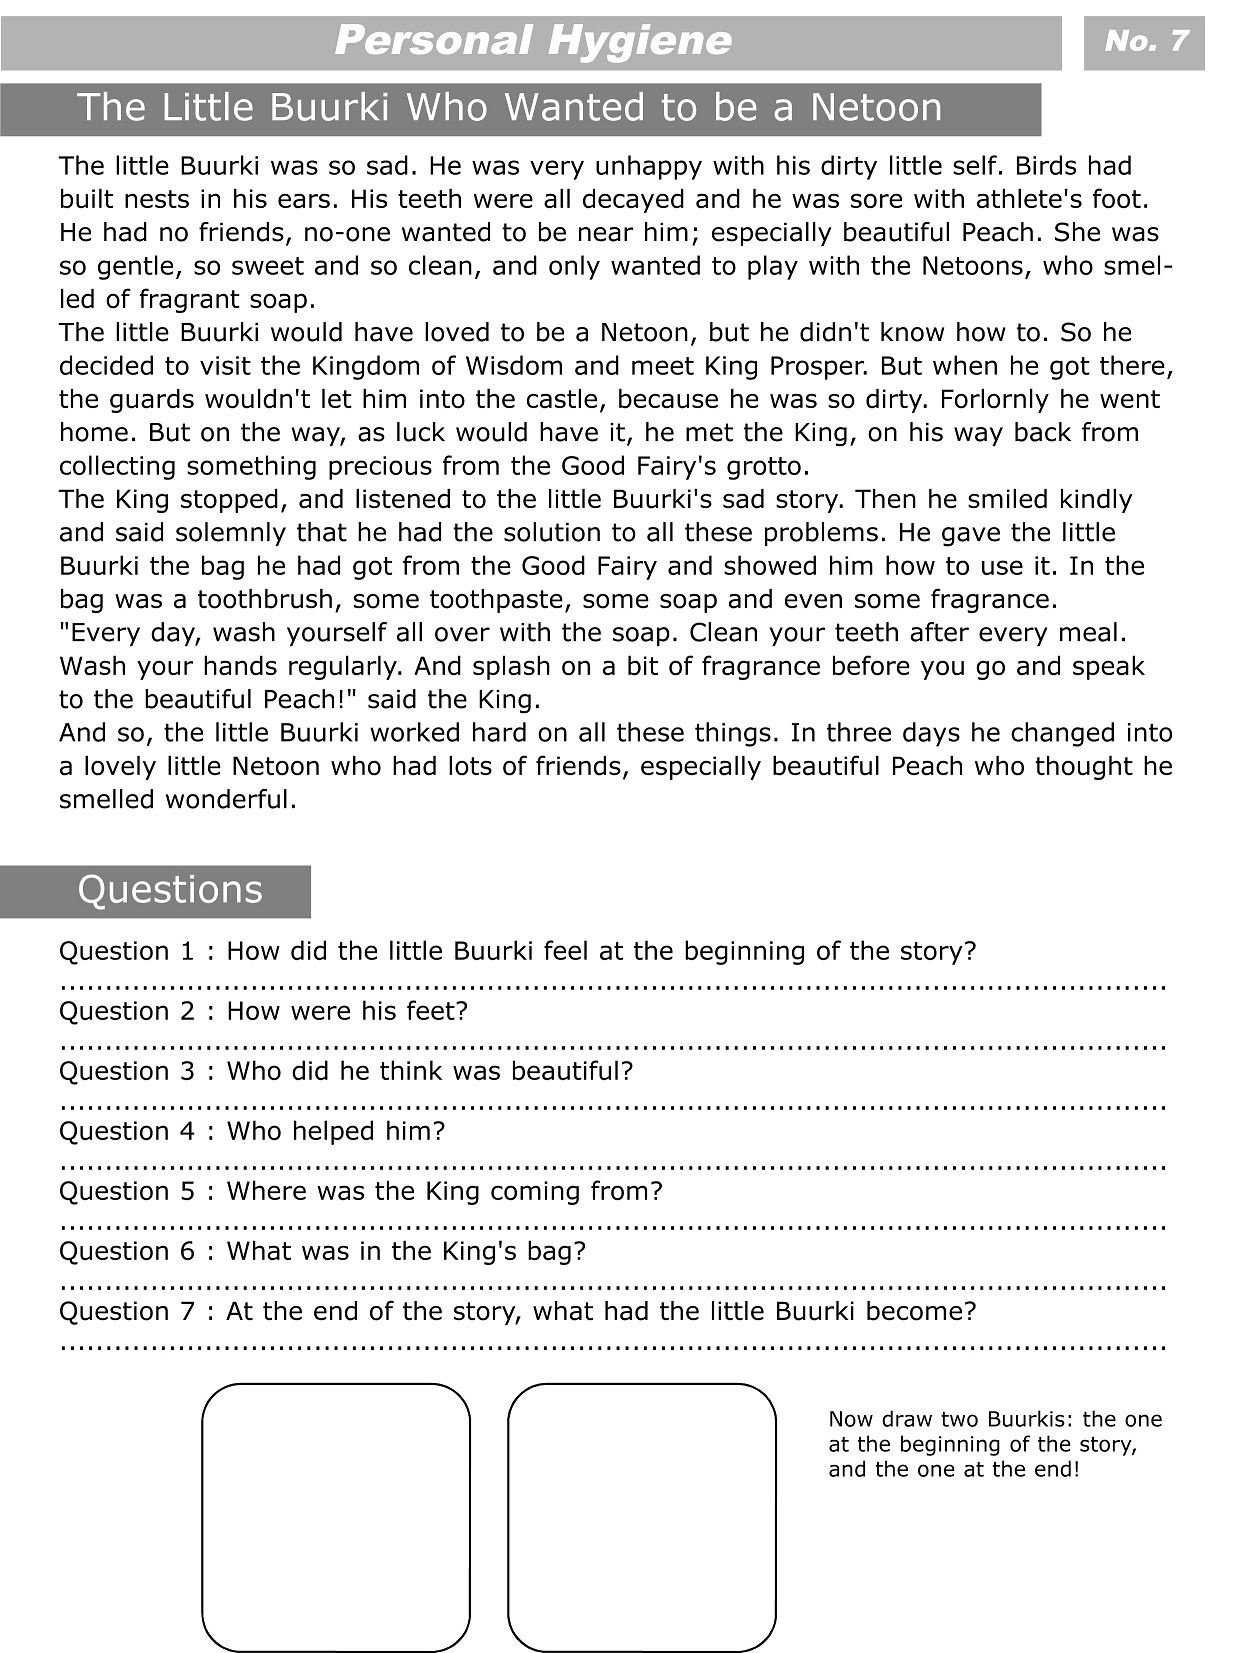 Personal Hygiene Worksheets For Kids 7 | Personal Hygiene | School - Free Printable Personal Hygiene Worksheets